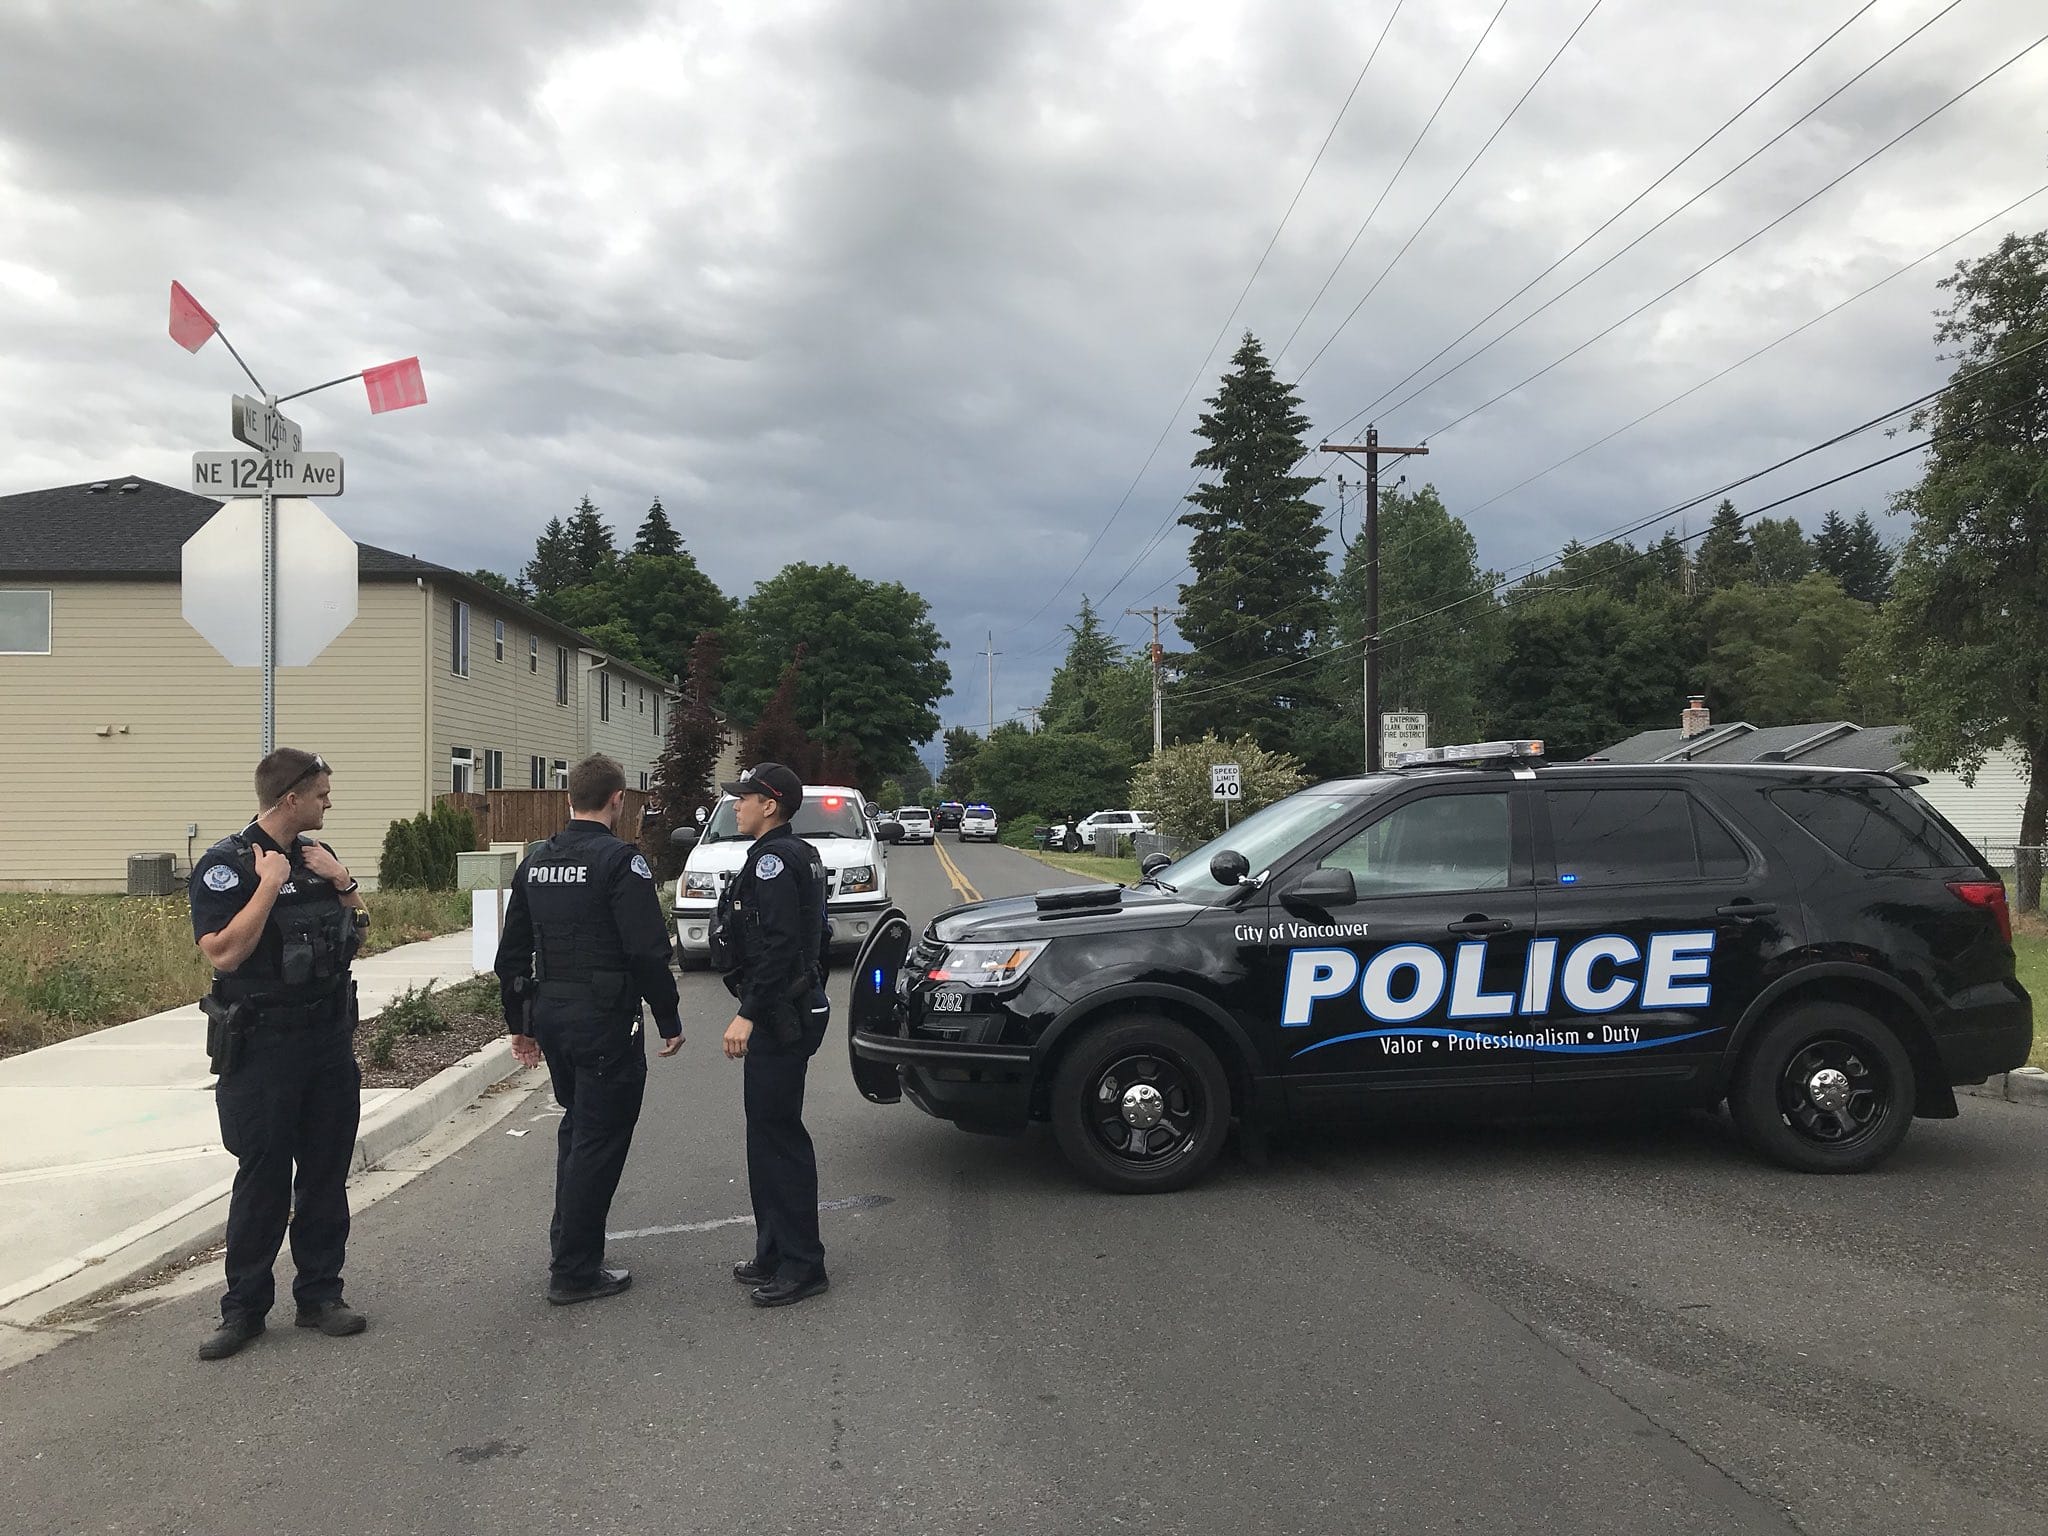 Vancouver police set up a blockade at Northeast 124th Avenue and Northeast 114th Street in Brush Prairie on June 13 after a report of possible shots fired.